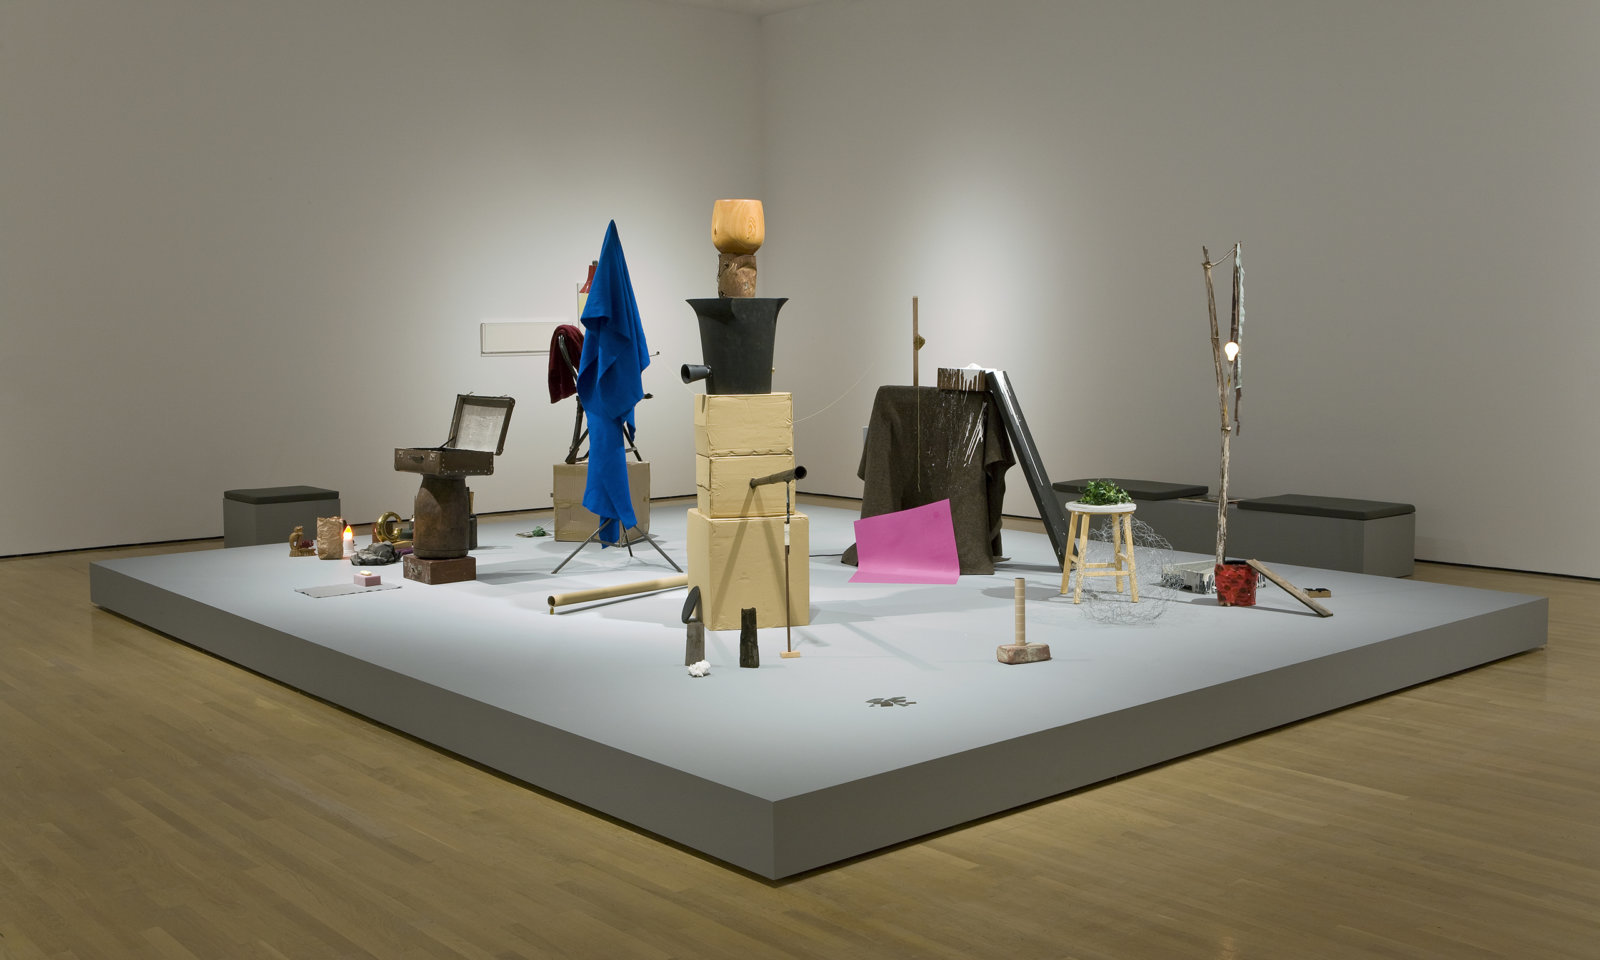 Geoffrey Farmer, And Finally the Street Becomes the Main Character (Clock), 2005–2008, wooden stage, computer controlled soundscape, 8 speakers, styrene brick, glass shards, paint can, tree branch, paint tray, stool, artificial ivy, hand carved wooden bowl, cardboard boxes, wooden mallet, protest sign, cardboard tubes, leather suitcase, folding chair, towel, sweater, desk lamp, string, blanket, light bulbs, tripod, sponge, lock box, tissue, paper bag, oil can, moth, thread, masking tape, felt, books, rag, wooden figure, spoon, paint, styrene cup, chopstick, candleholder, ballet costume, brass sculpture, found wood, various framed works, dimensions variable